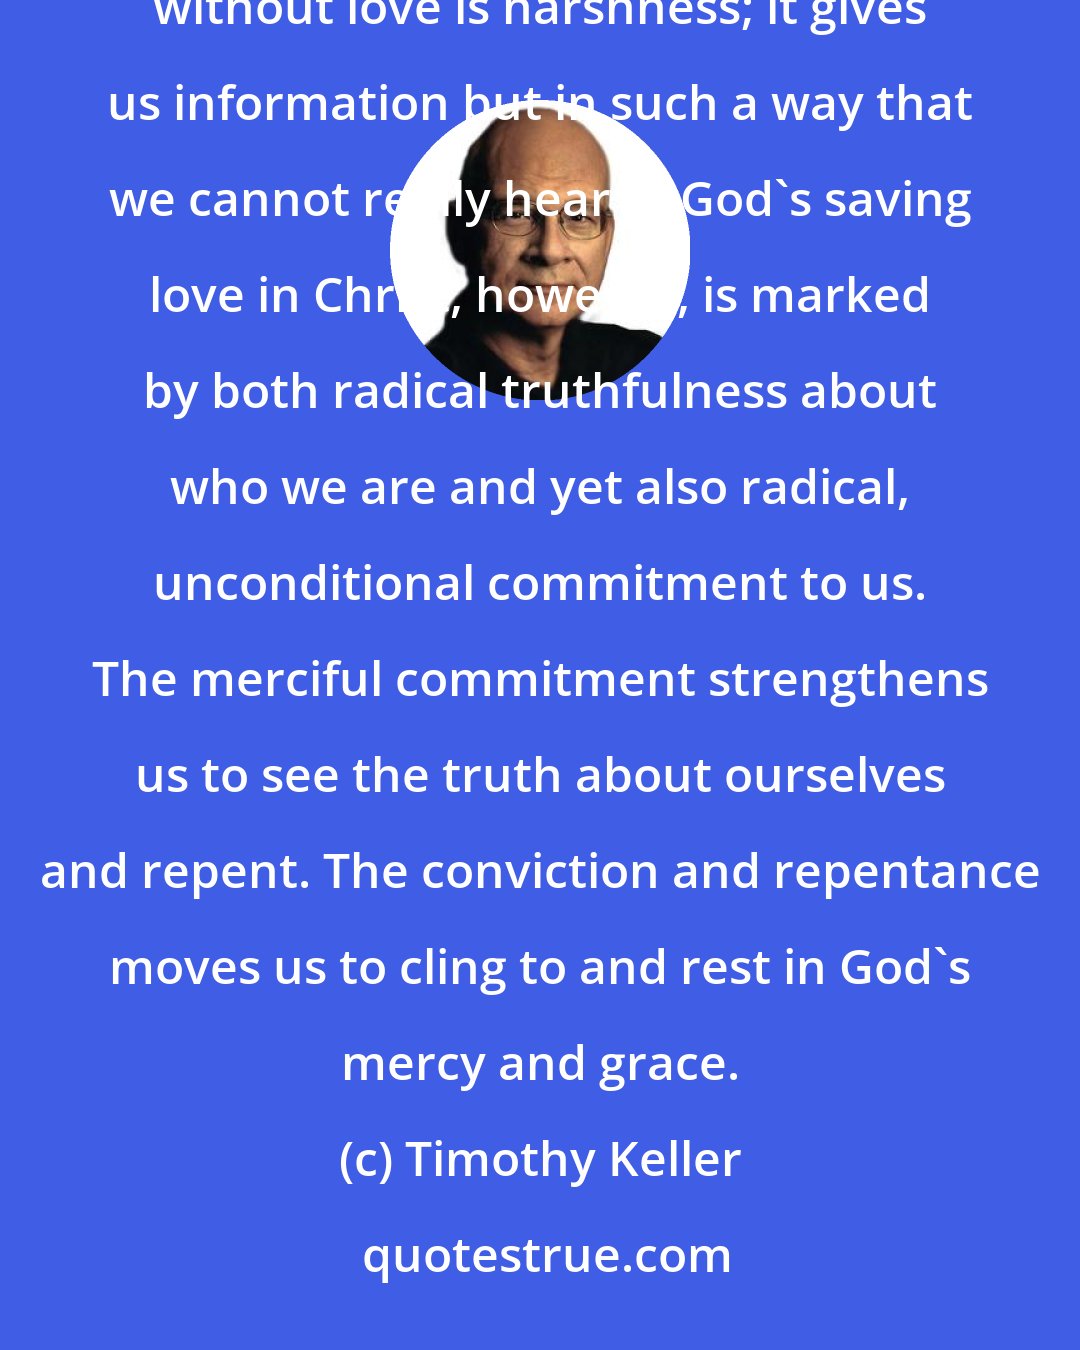 Timothy Keller: Love without truth is sentimentality; it supports and affirms us but keeps us in denial about our flaws. Truth without love is harshness; it gives us information but in such a way that we cannot really hear it. God's saving love in Christ, however, is marked by both radical truthfulness about who we are and yet also radical, unconditional commitment to us. The merciful commitment strengthens us to see the truth about ourselves and repent. The conviction and repentance moves us to cling to and rest in God's mercy and grace.